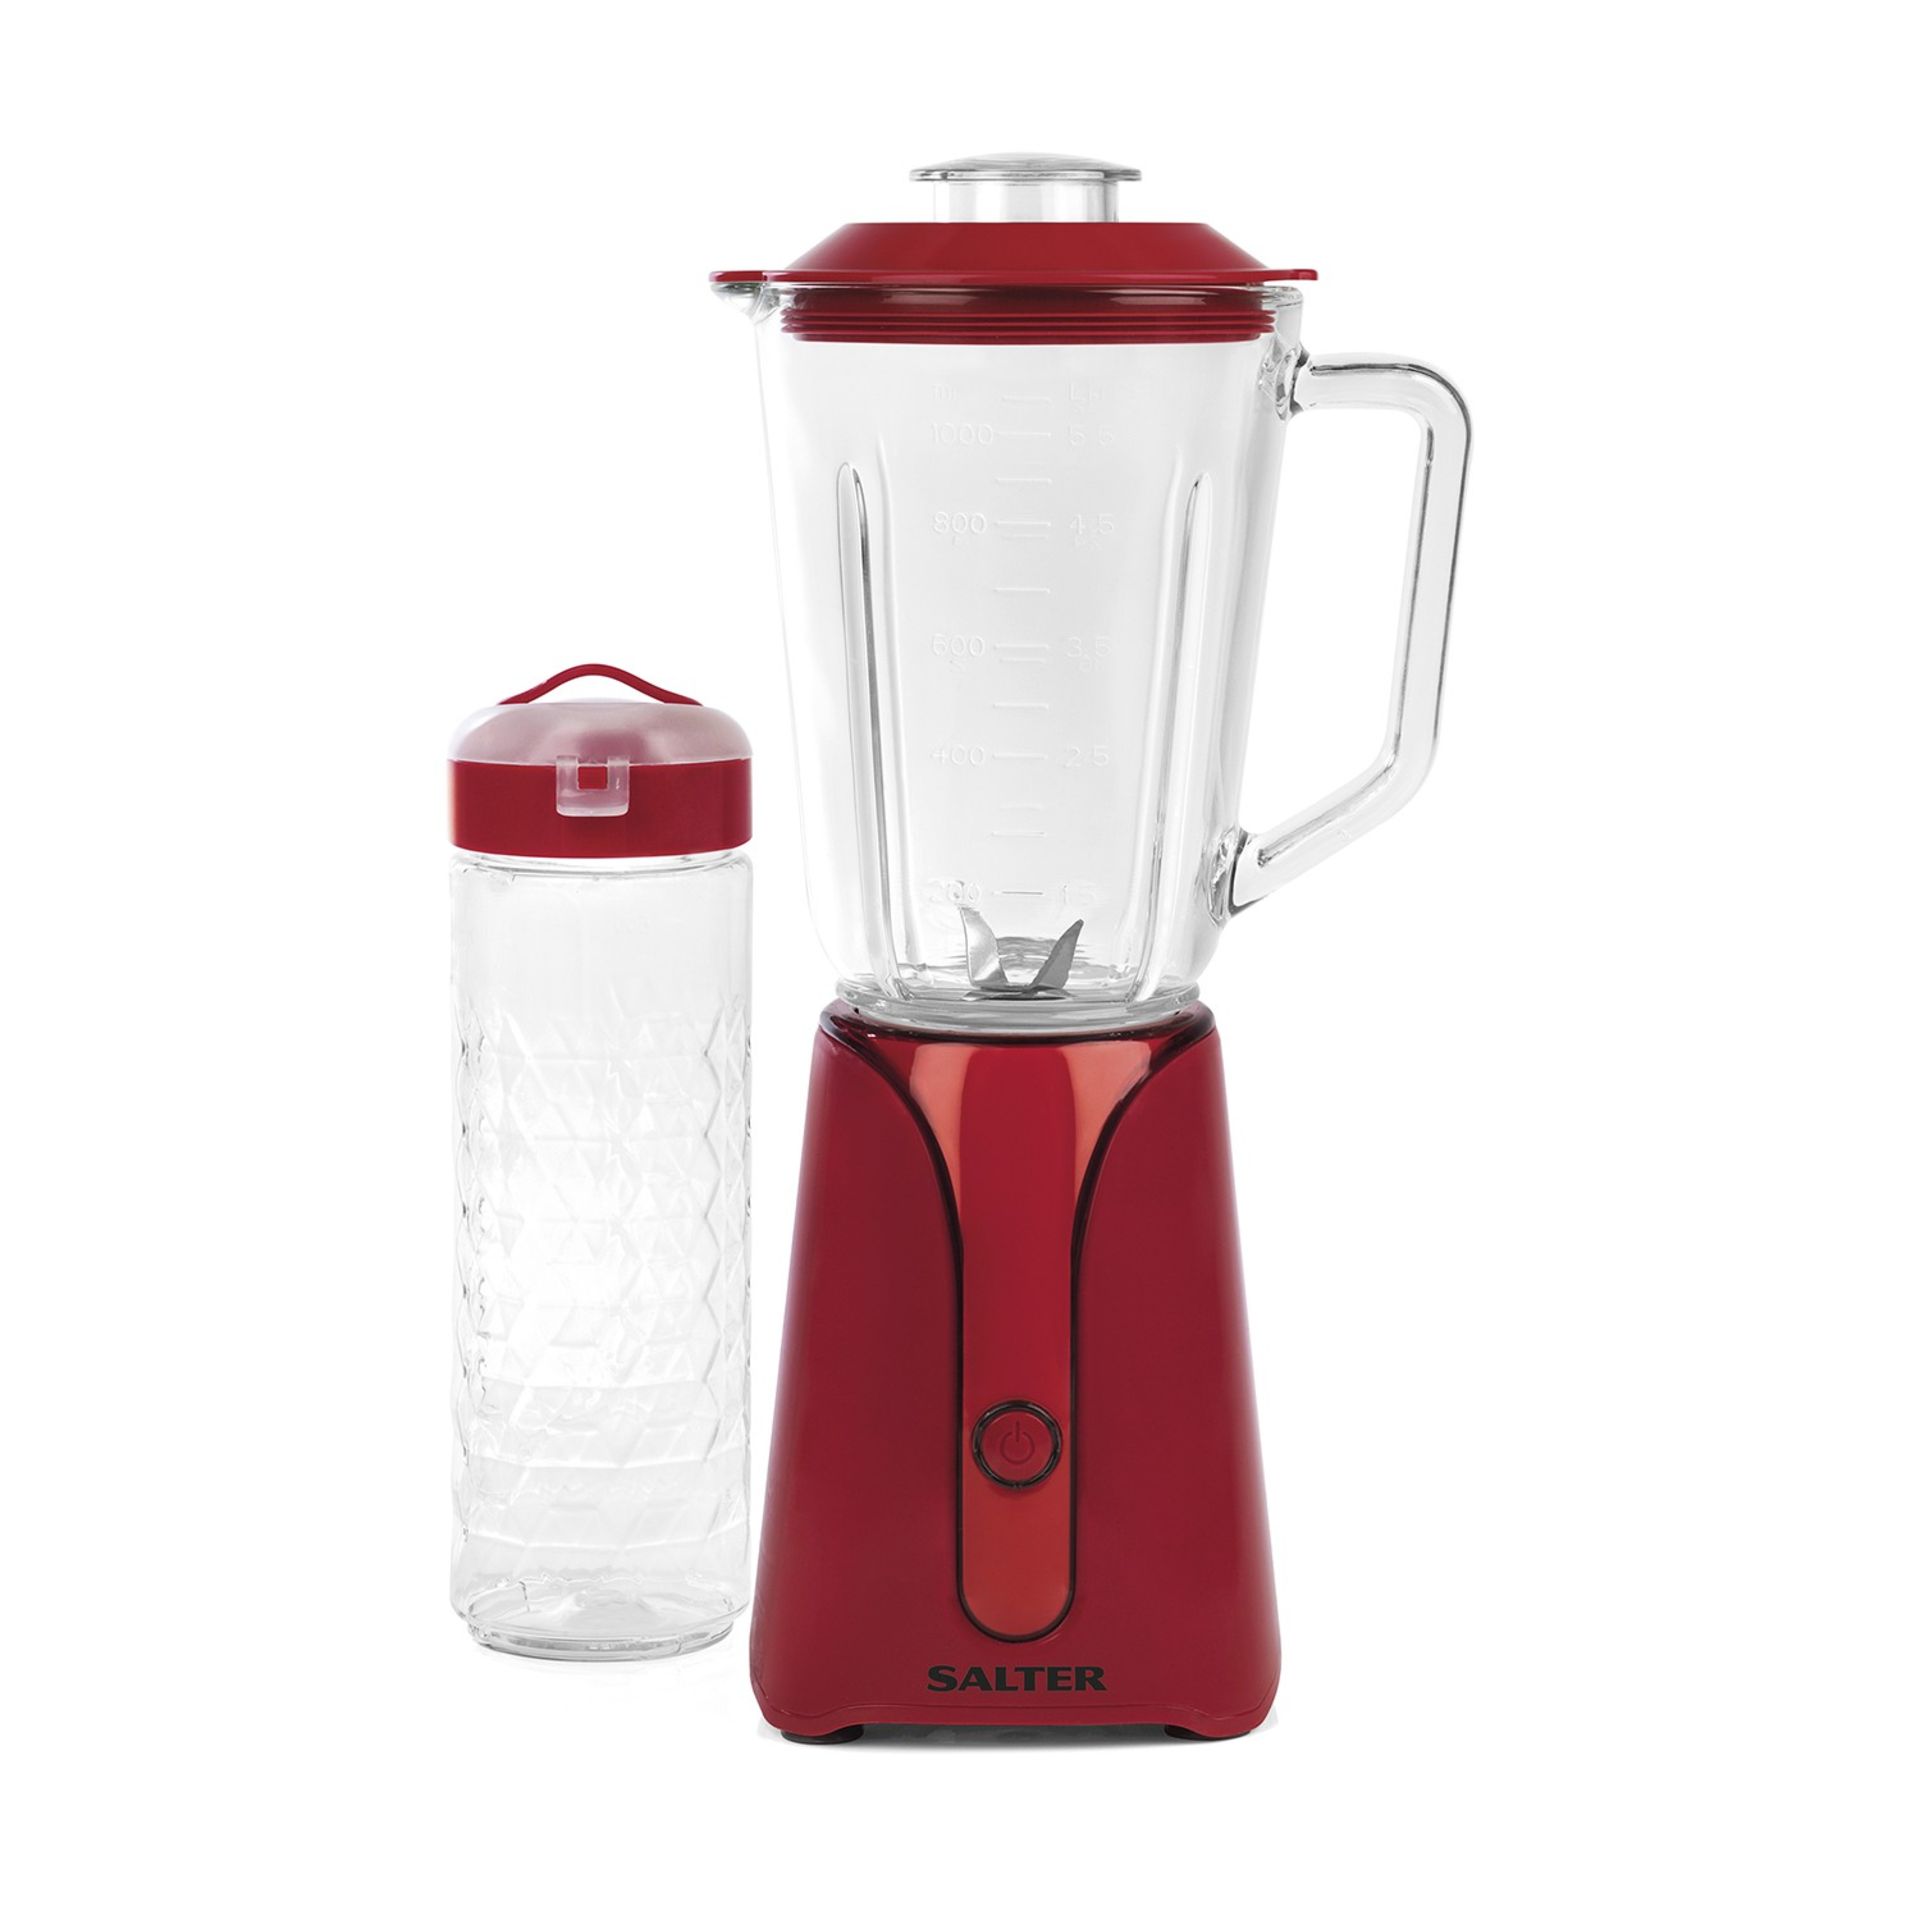 V Brand New Salter 2 In 1 To Go Blender Set With Stainless Steel Crossblade Attachment-Diamond